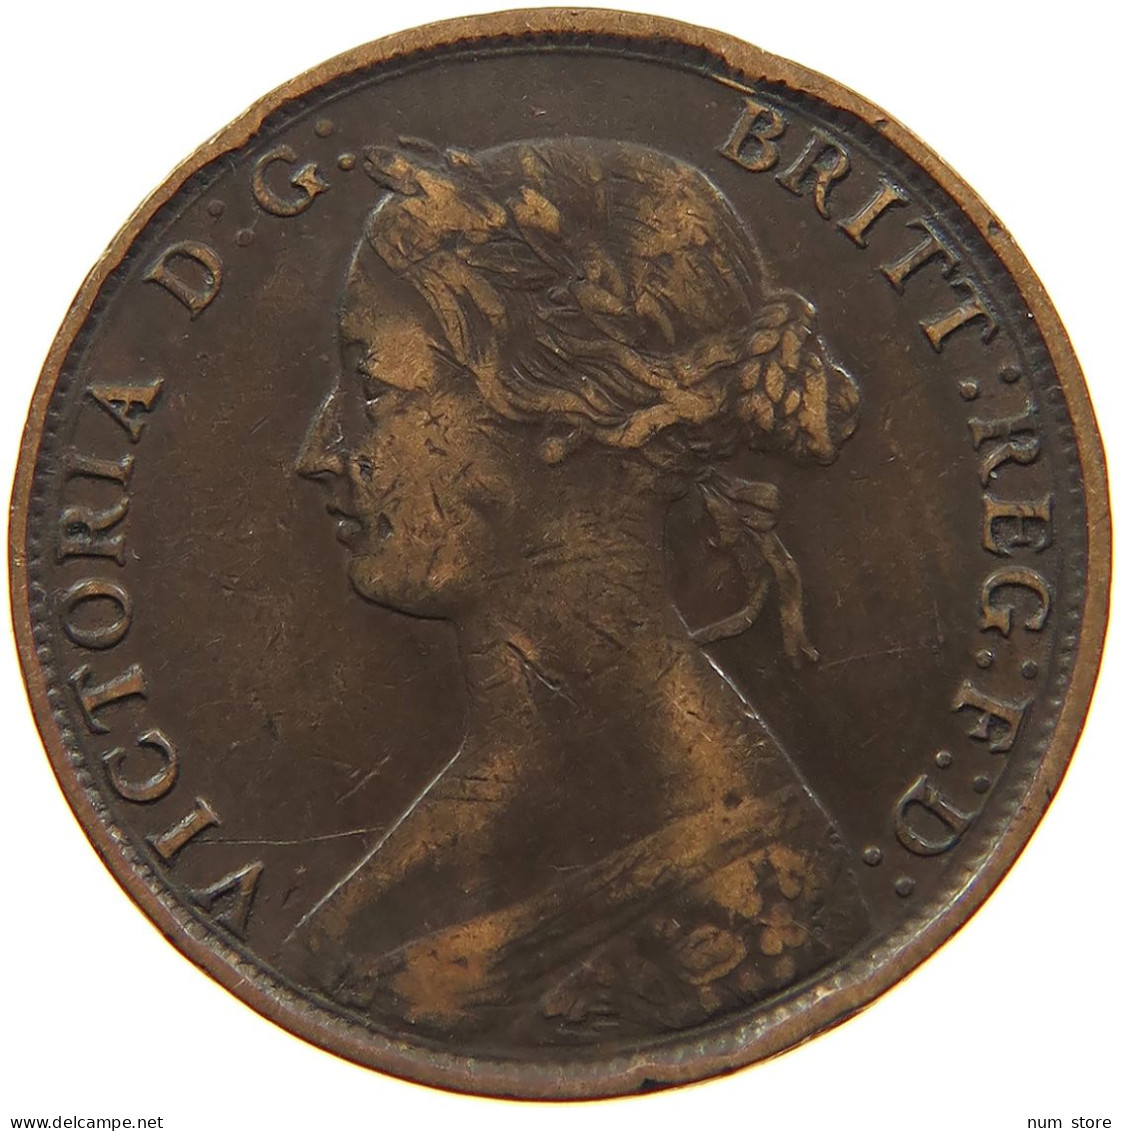 GREAT BRITAIN 1/2 PENNY 1861 VICTORIA 1837-1901 COUNTERMARKED B #MA 101864 - C. 1/2 Penny